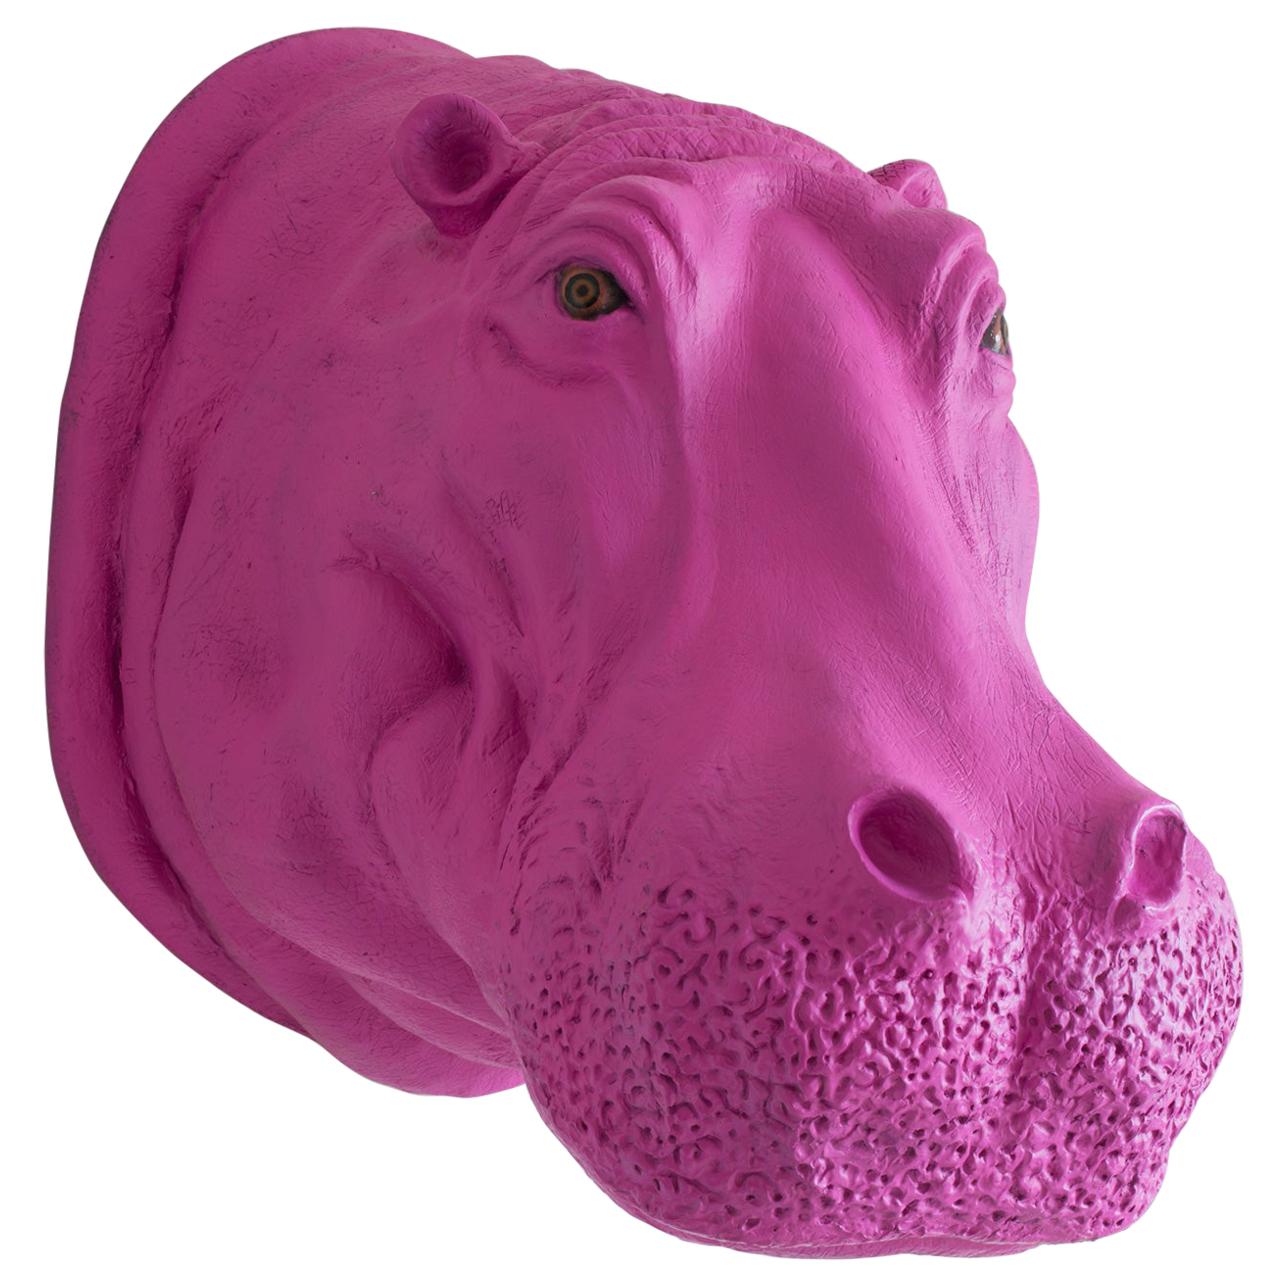 Vintage Pink Giant Hippo Head For Sale